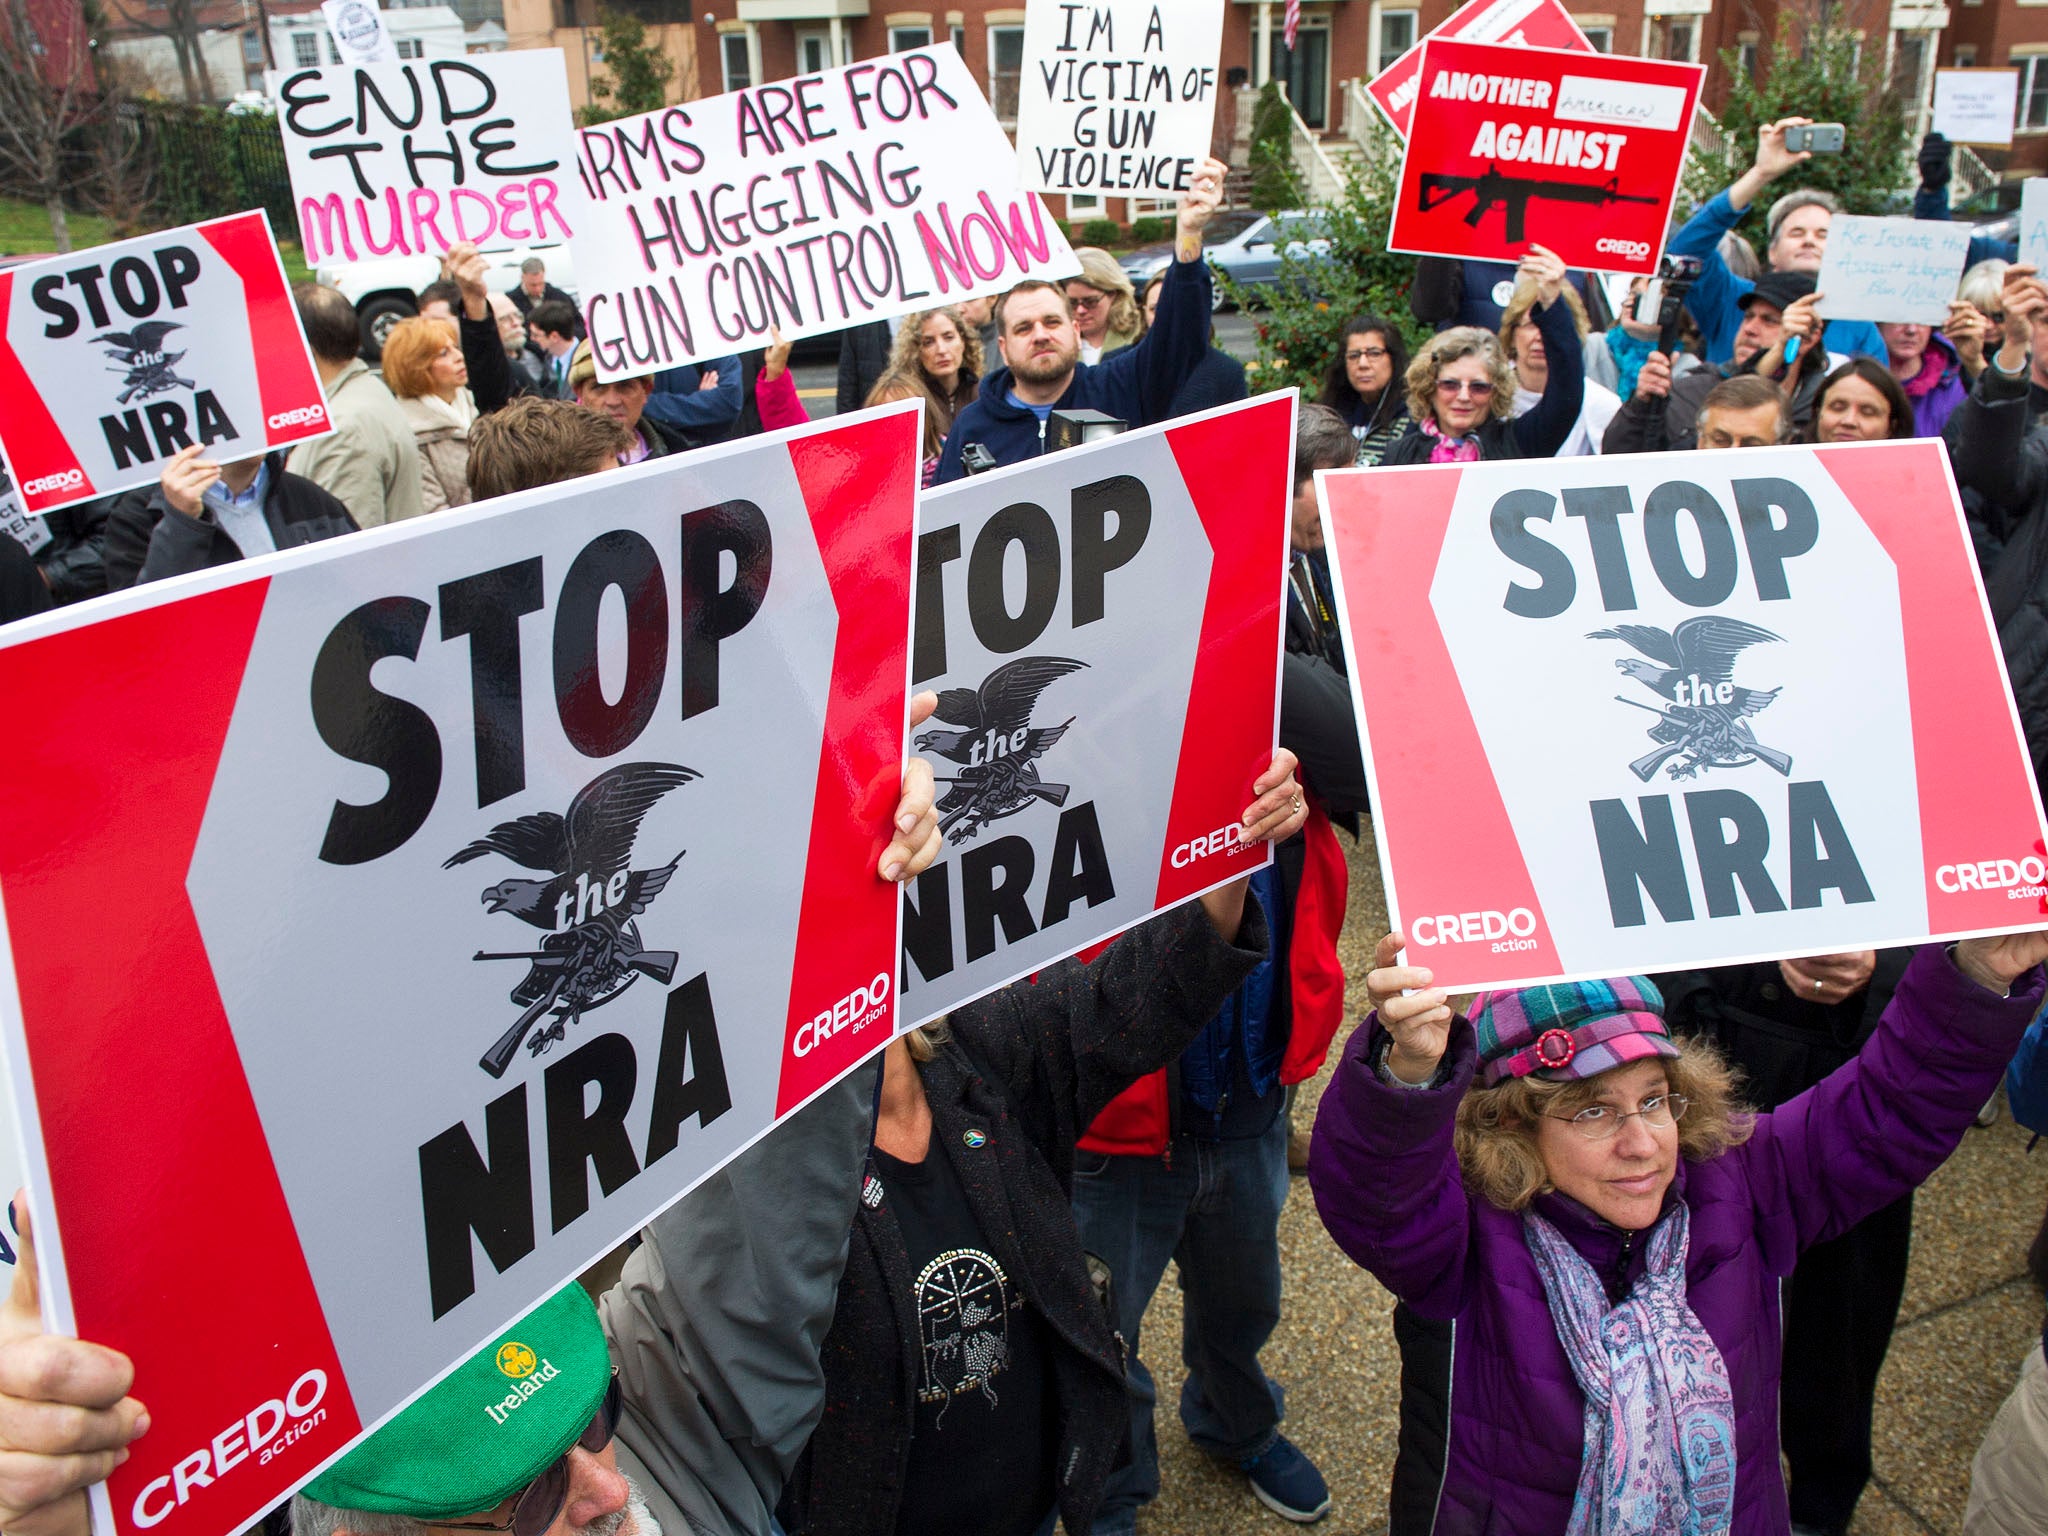 Protesters target the NRA